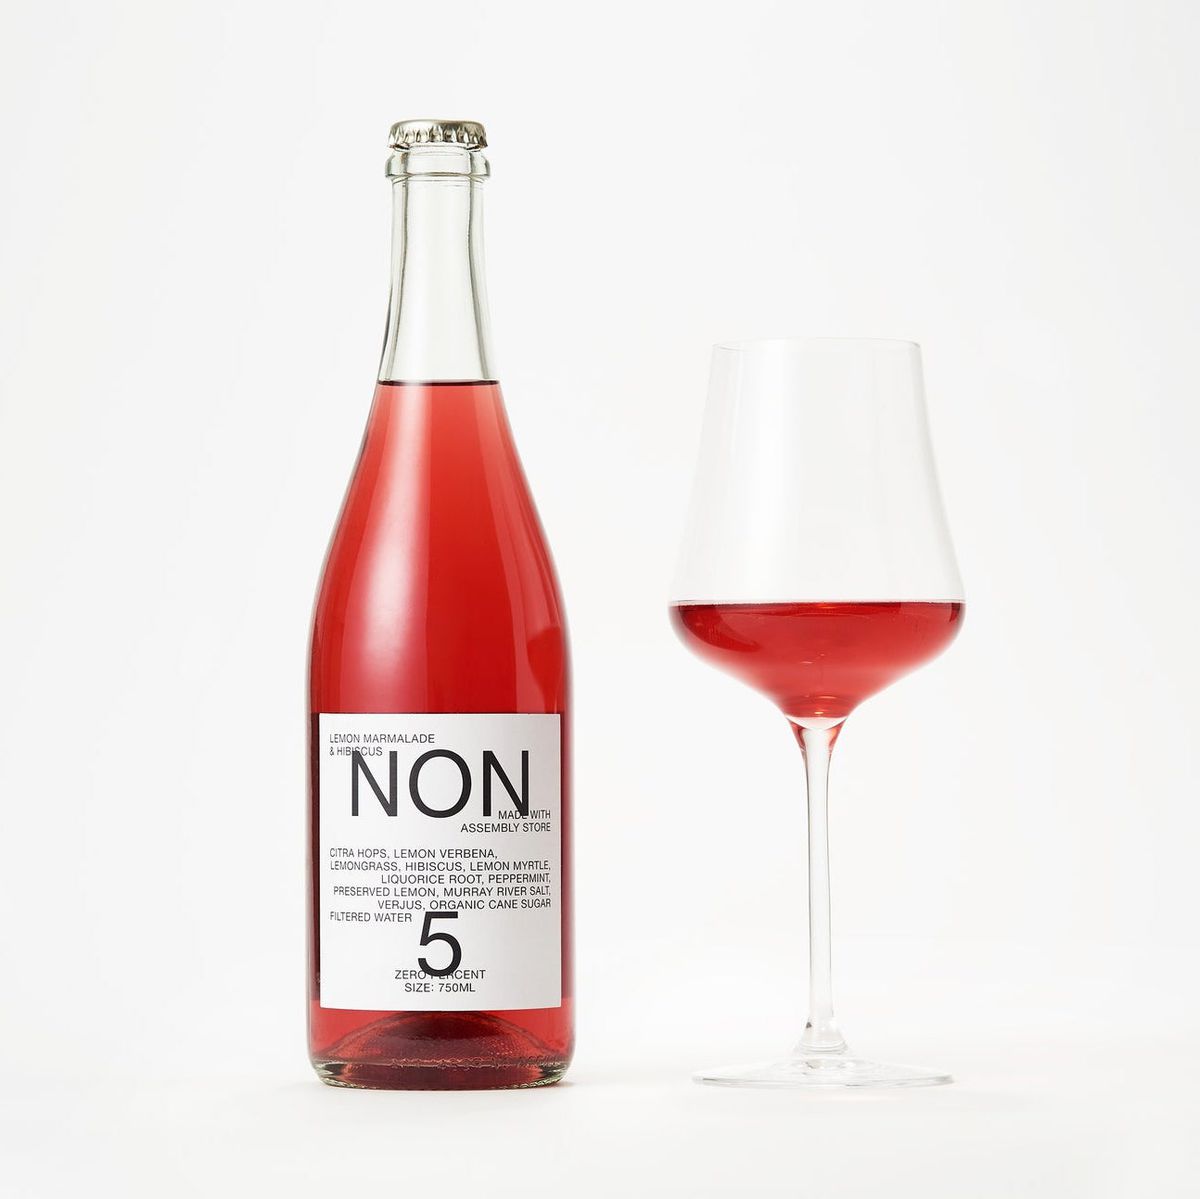 A bottle of red beverage with a white label that reads “NON 5” next to a glass filled with the same beverage.